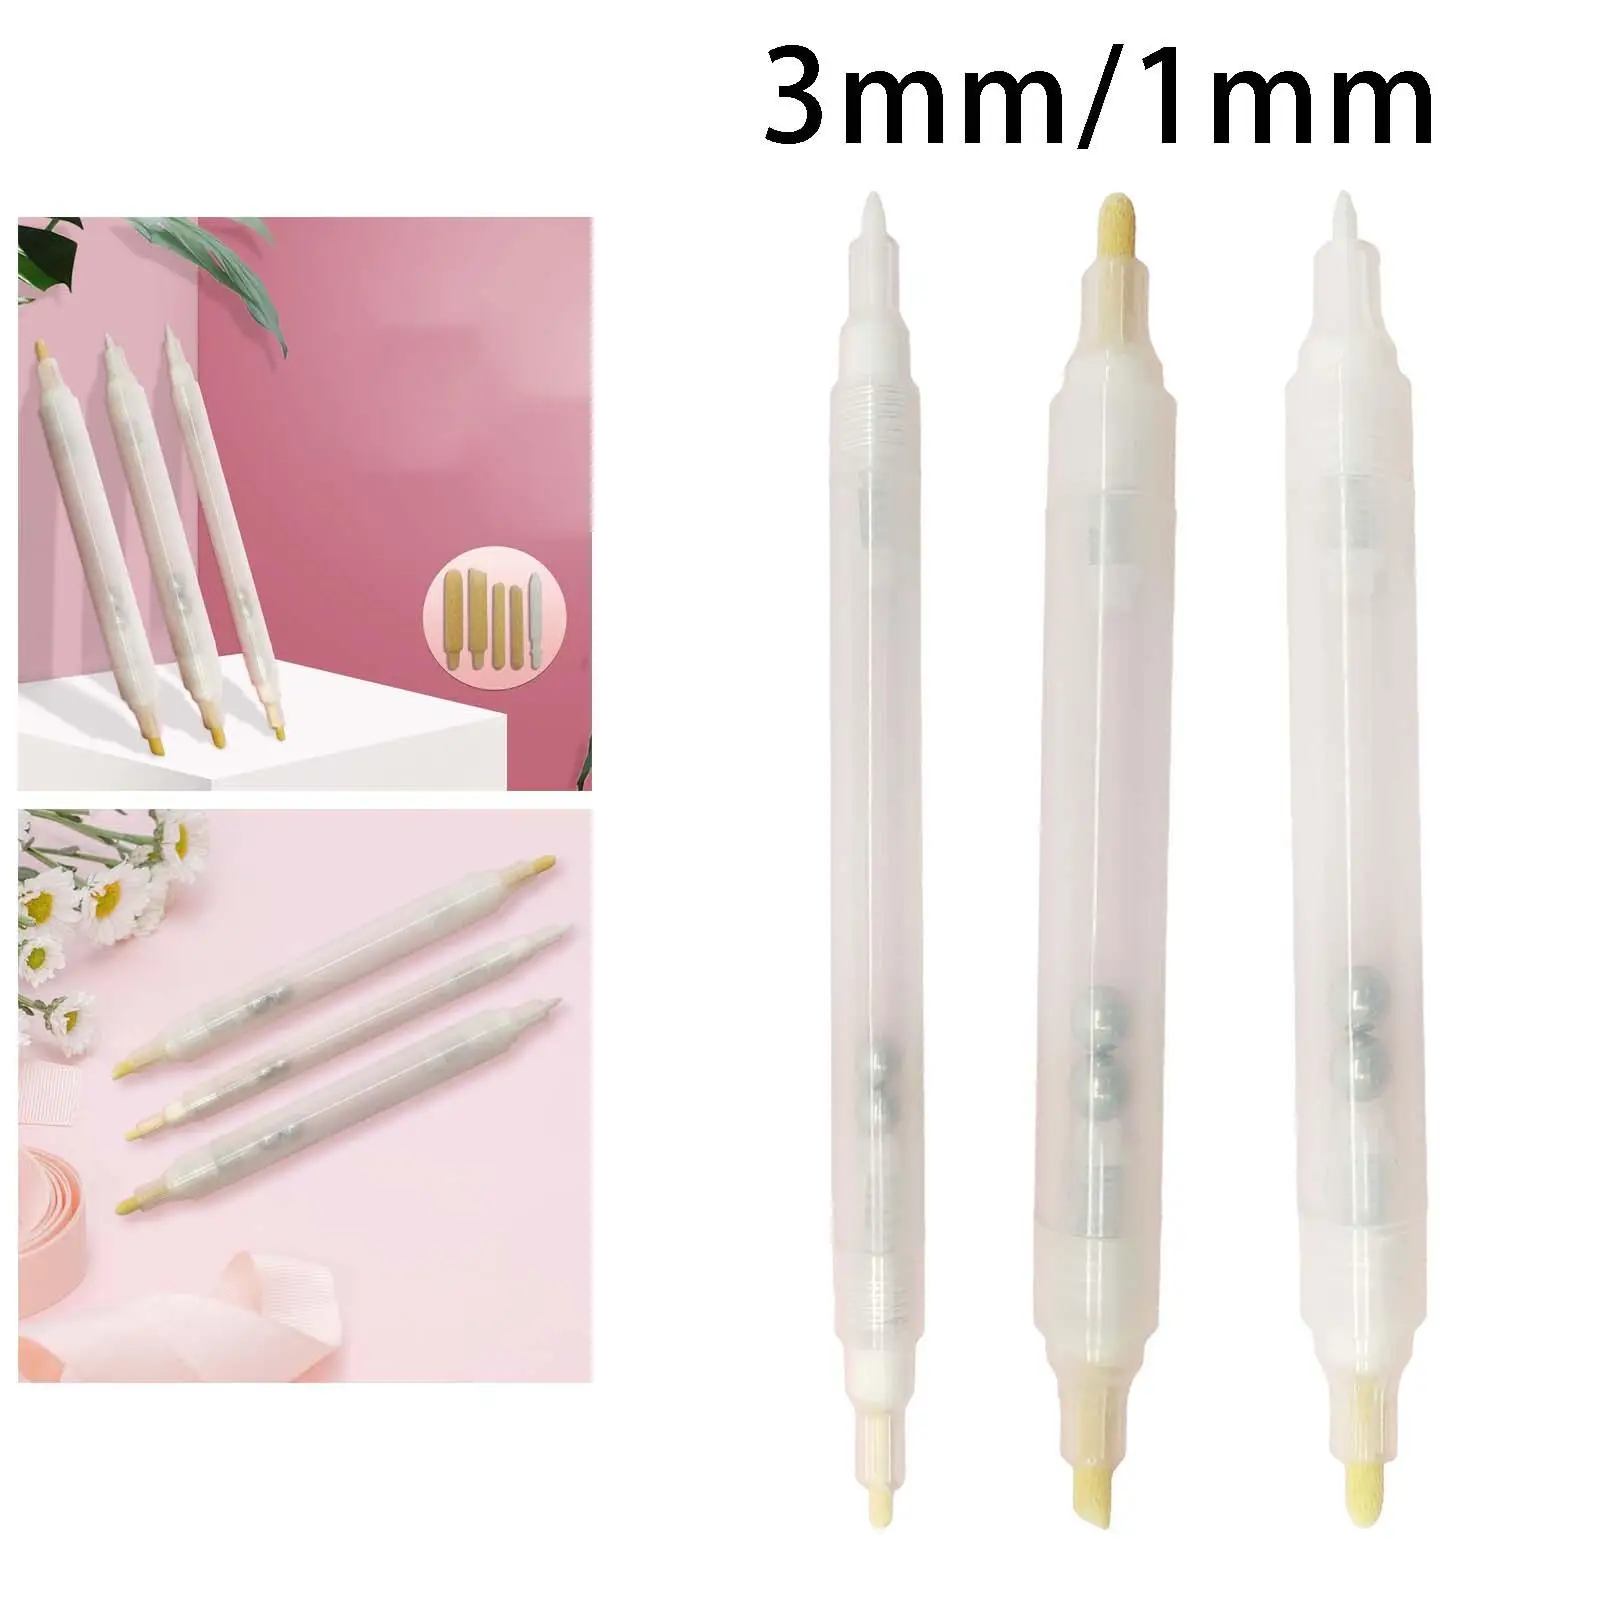 3 Pieces Professional Empty Refill Pen Double Head DIY Penholder Tool Empty Marker Tube for Drawing Craft Lettering Graffiti Art